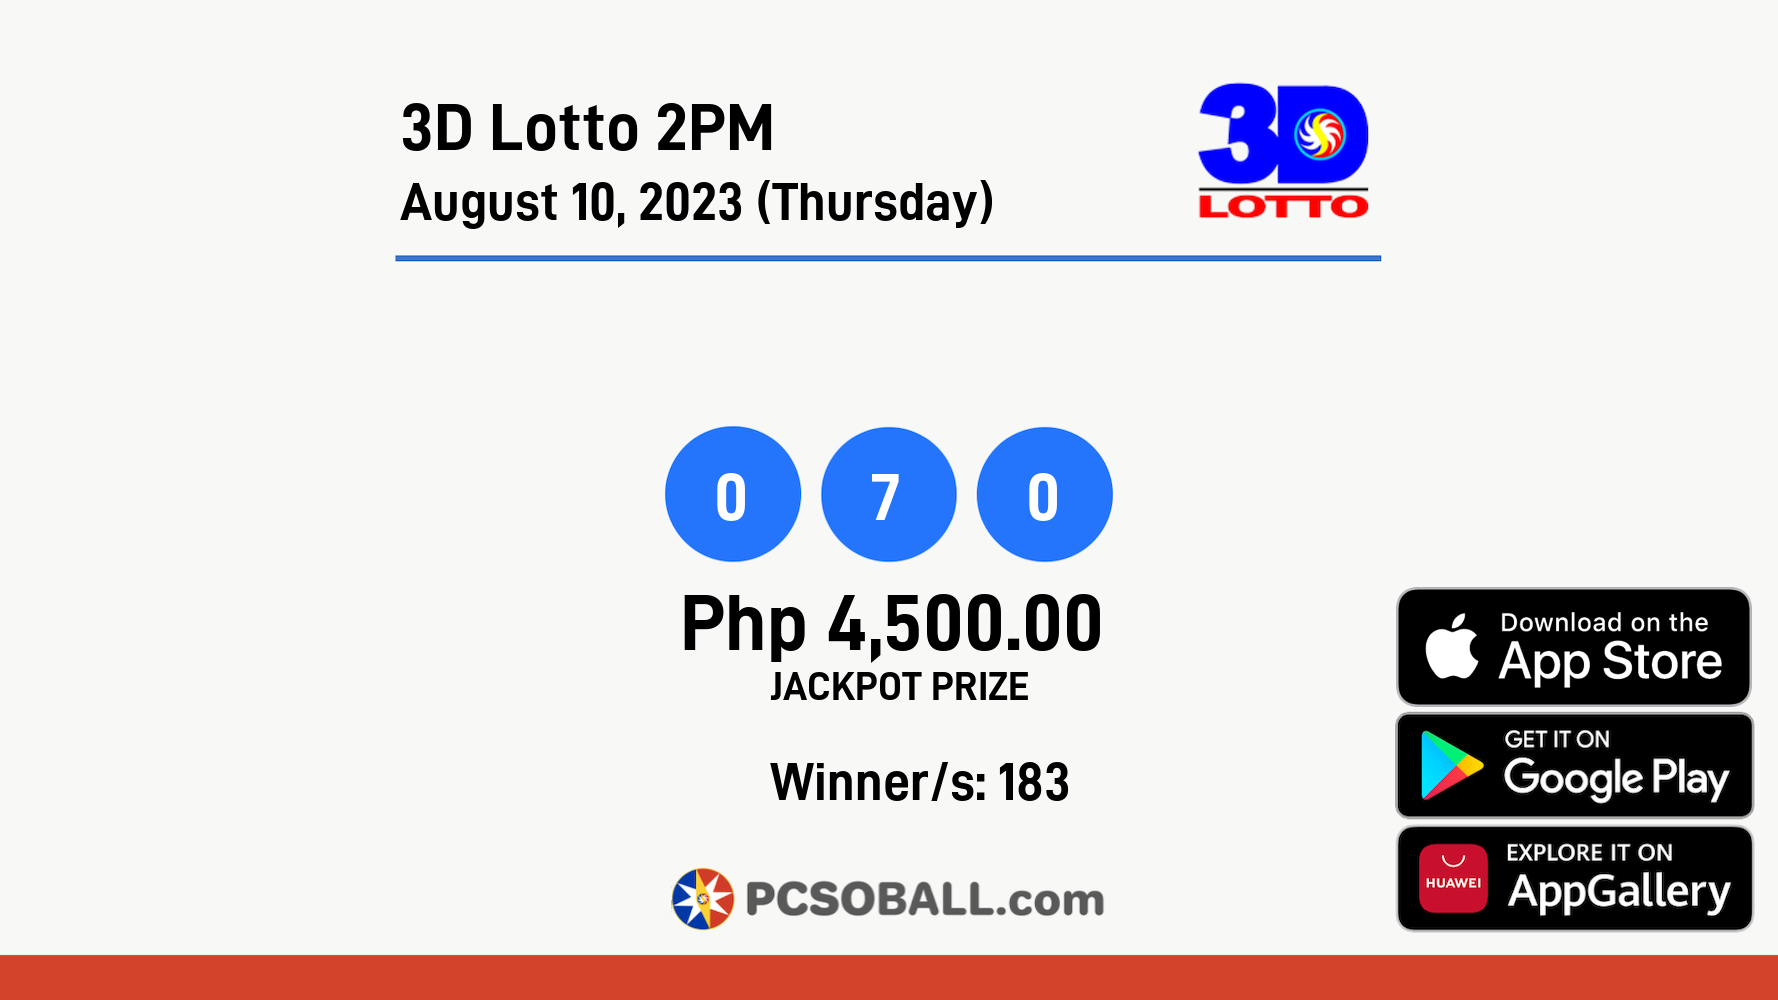 3D Lotto 2PM August 10, 2023 (Thursday) Result